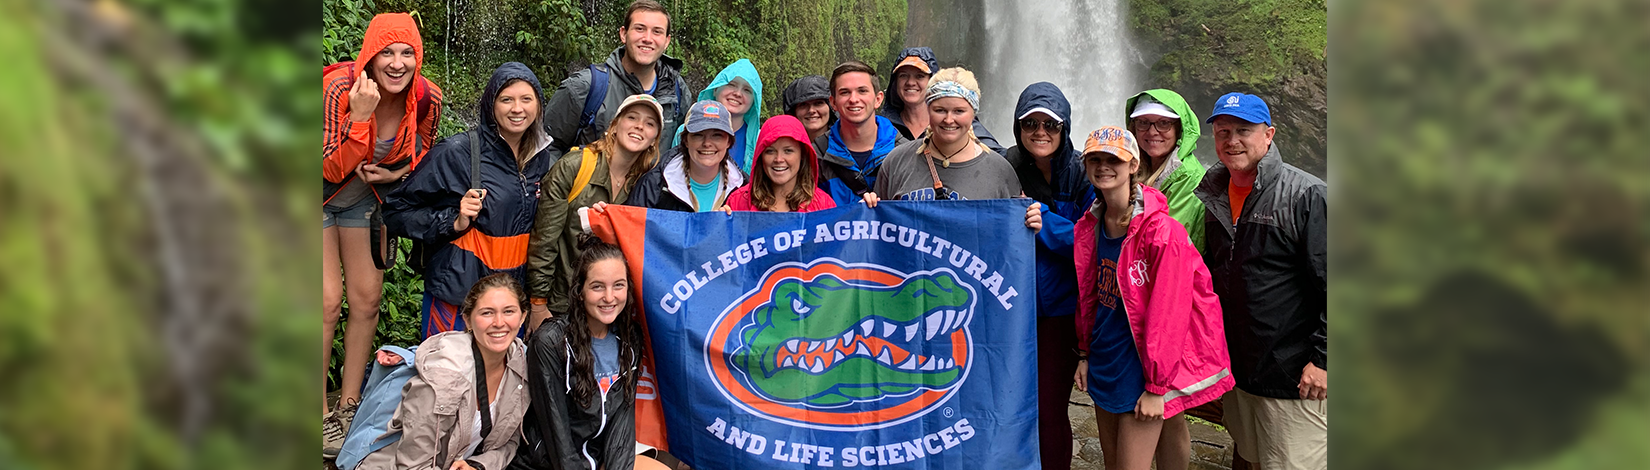 UF students and faculty member hold a UF College of Agricultural and Life Sciences with a gator head flag in front of a waterfall.